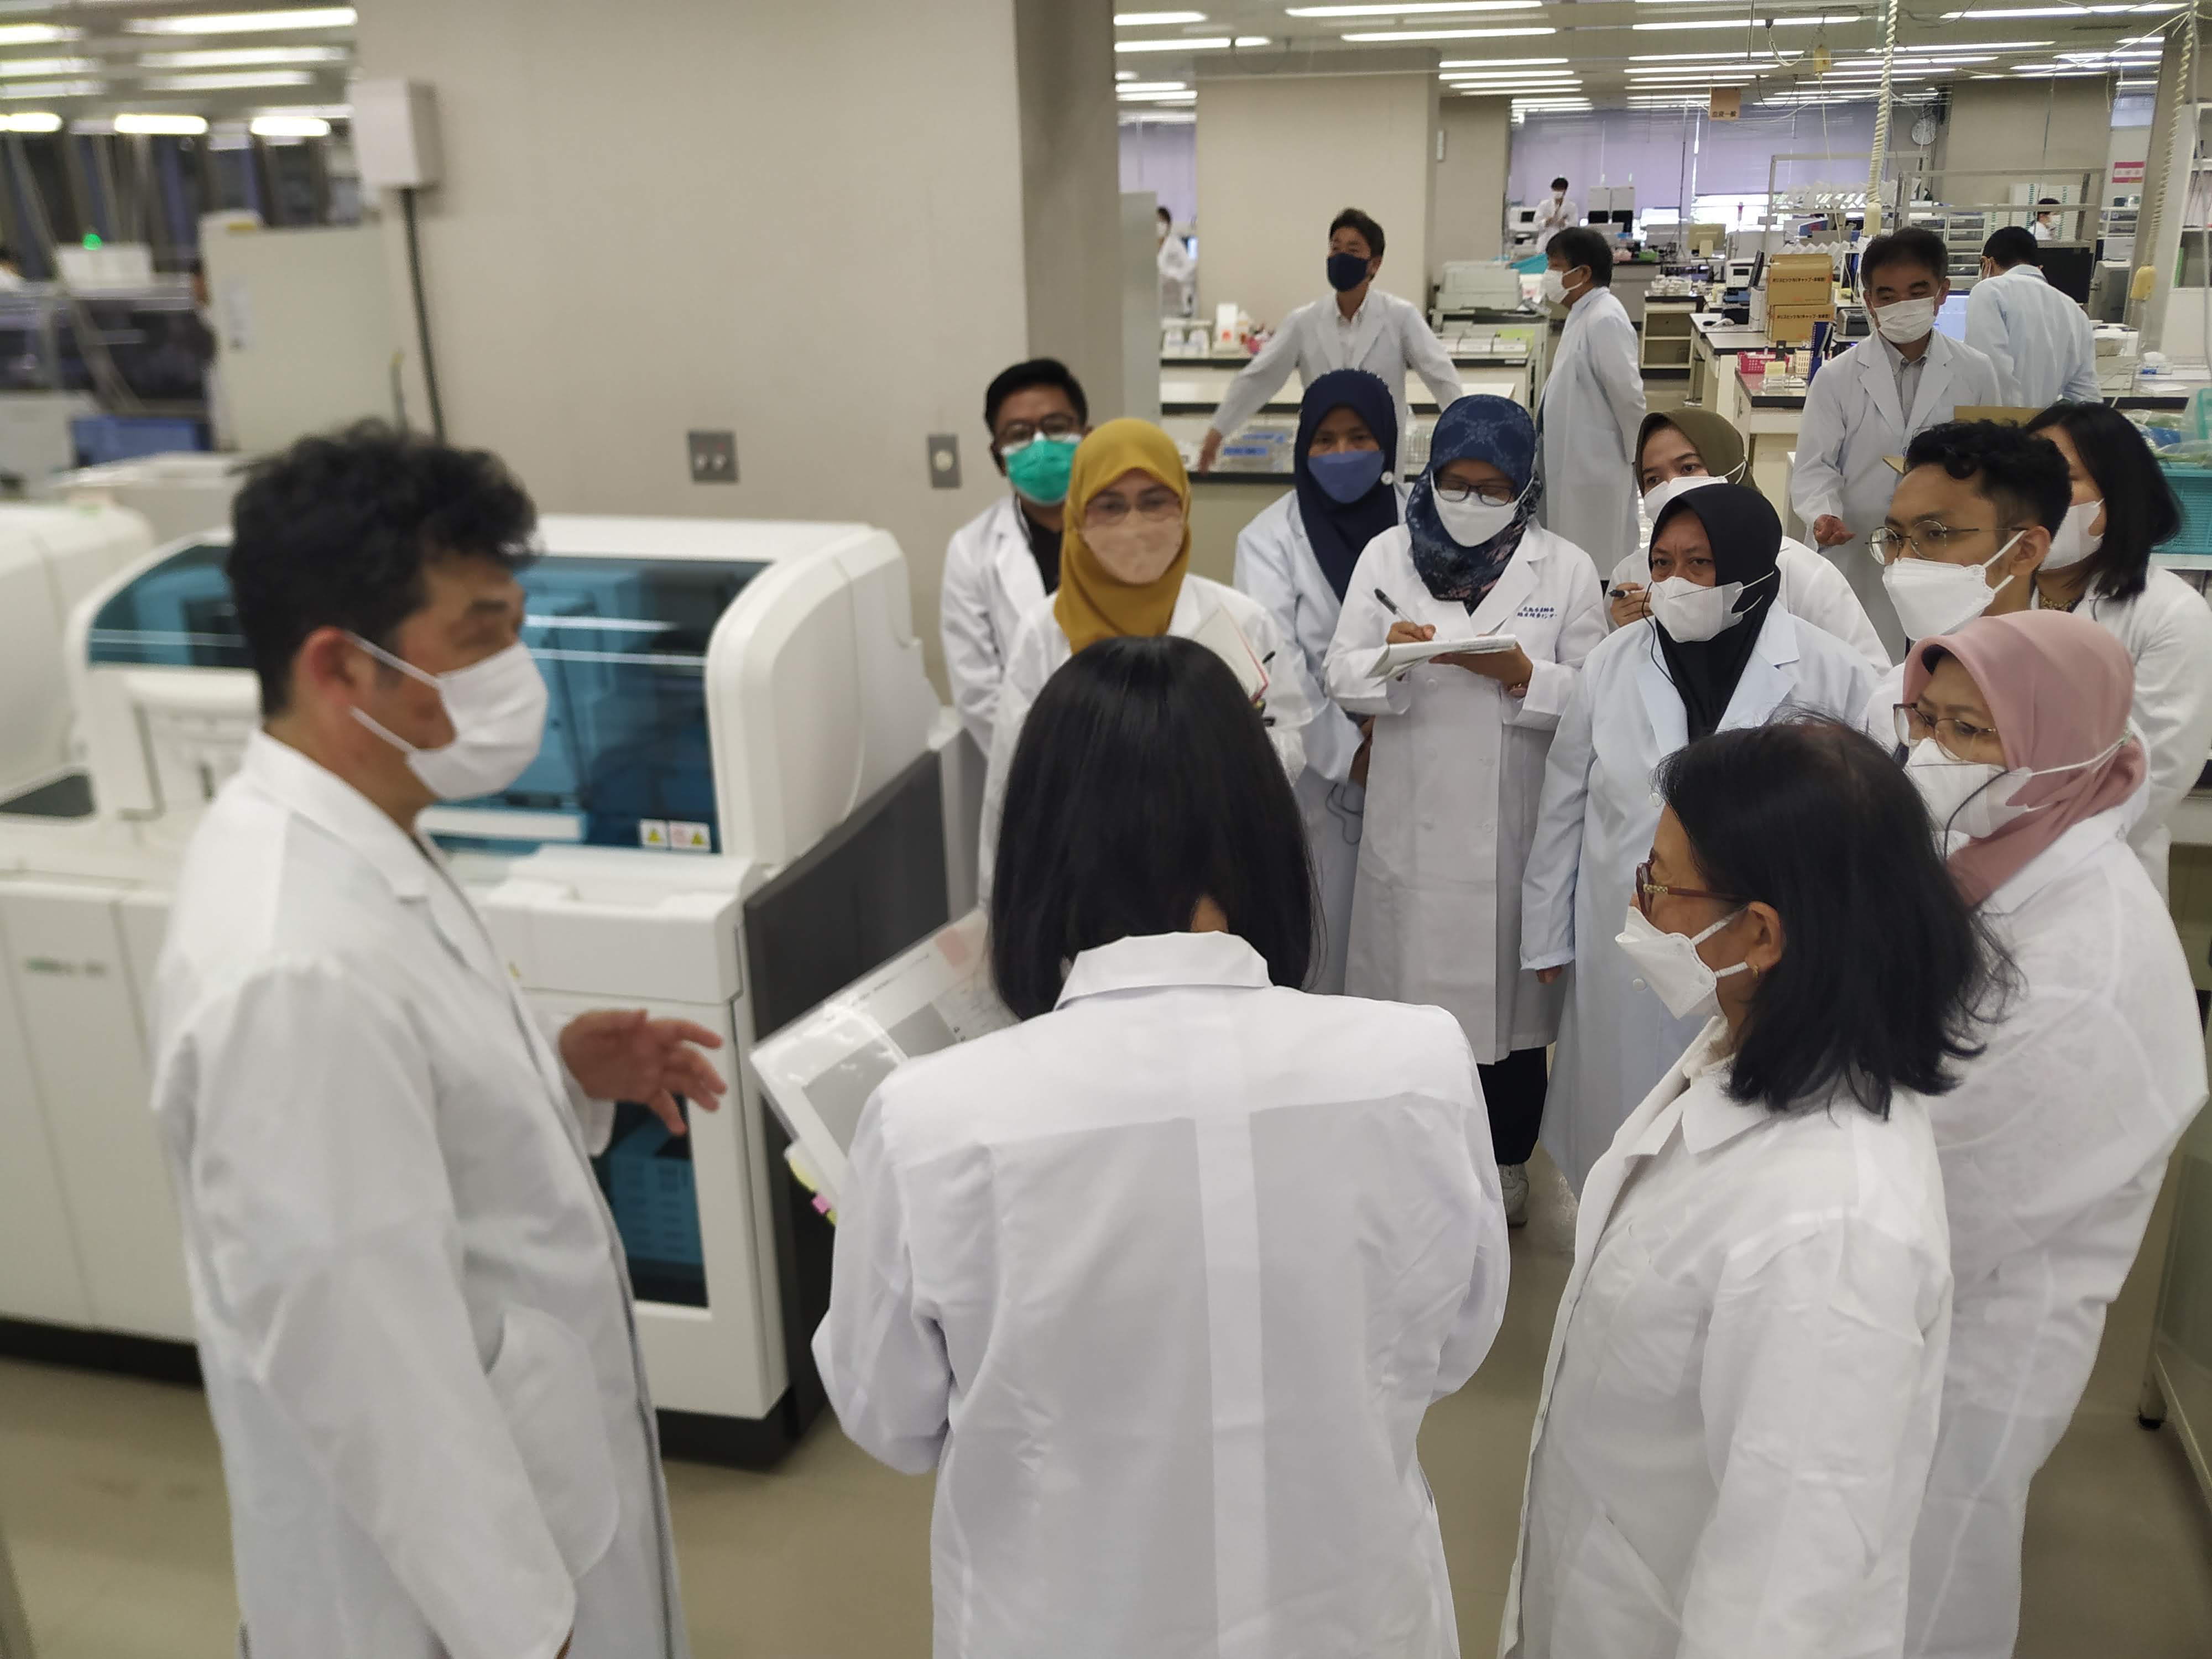 Learn on laboratory testing systems during the COVID-19 pandemic as well as normal operations (at Hiroshima City Medical Association Clinical Testing Center)